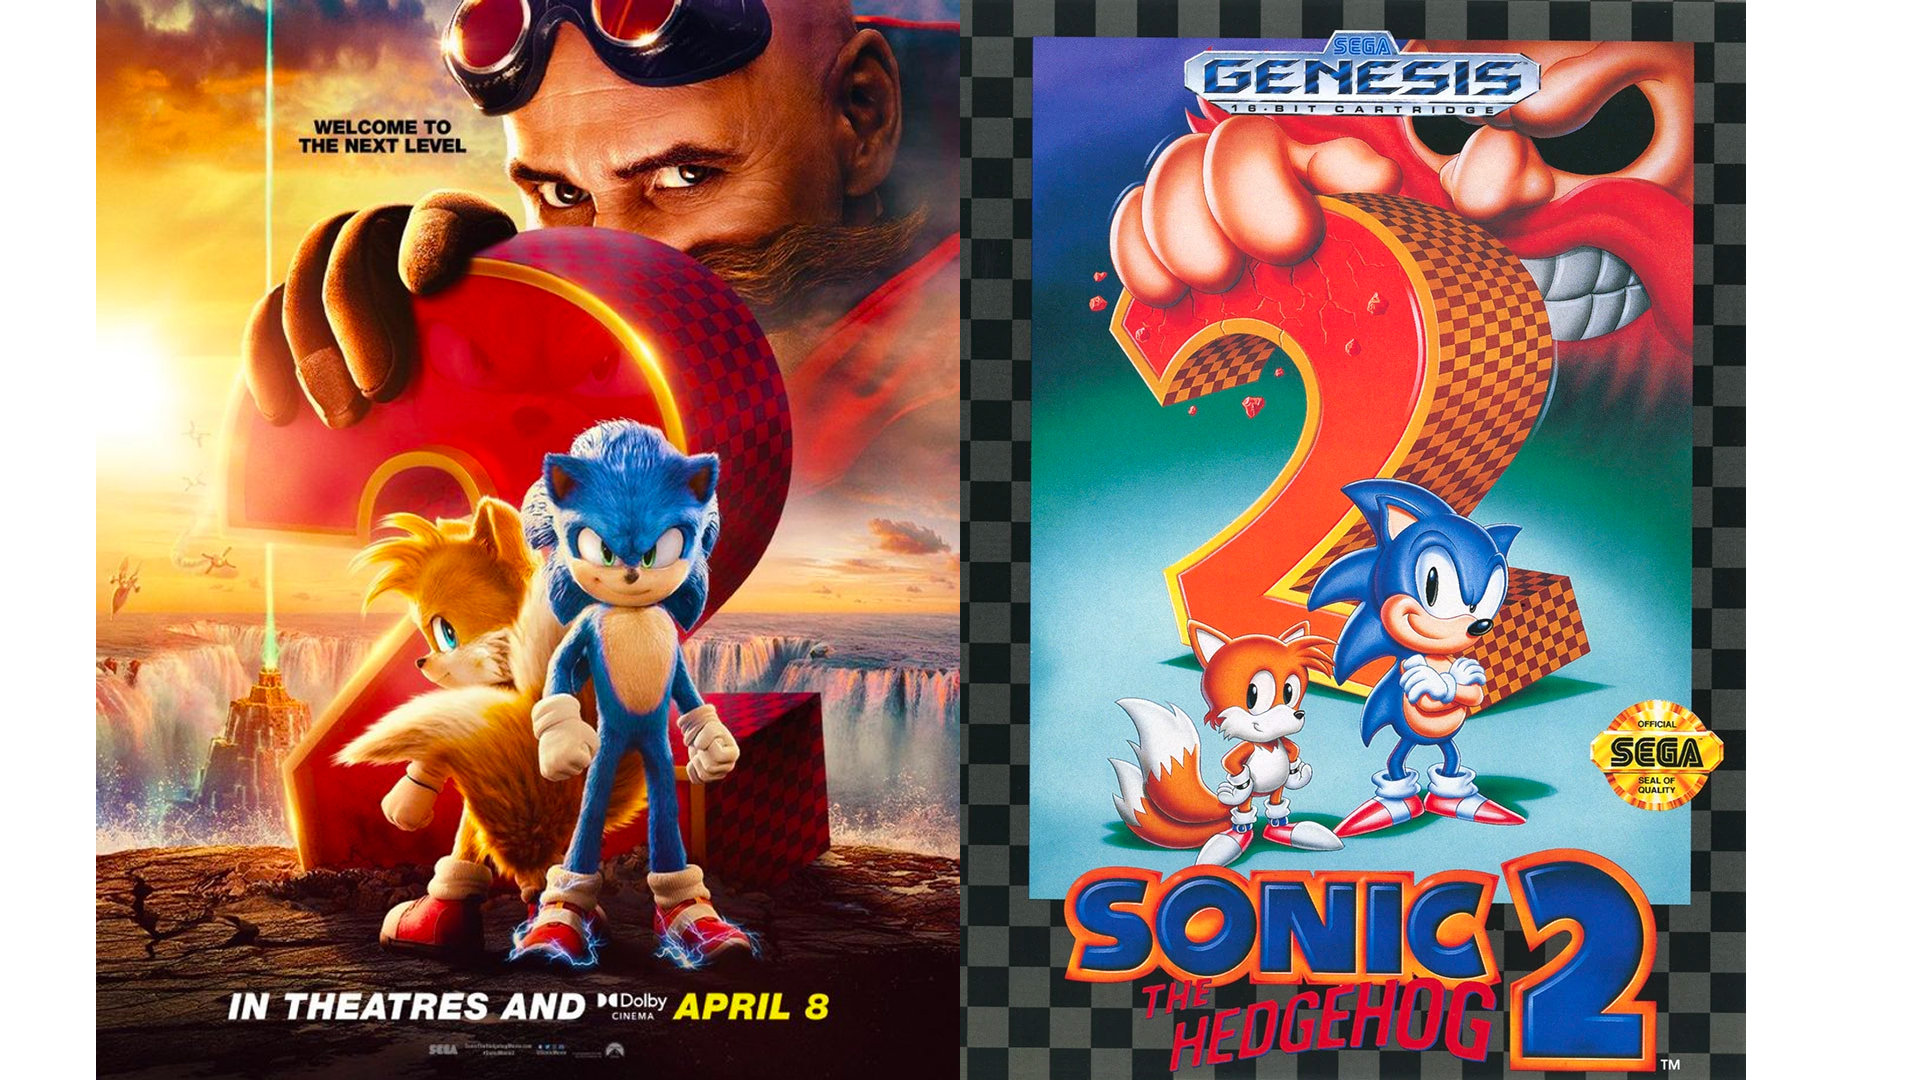 Sonic the Hedgehog 2 Movie Poster Comparison